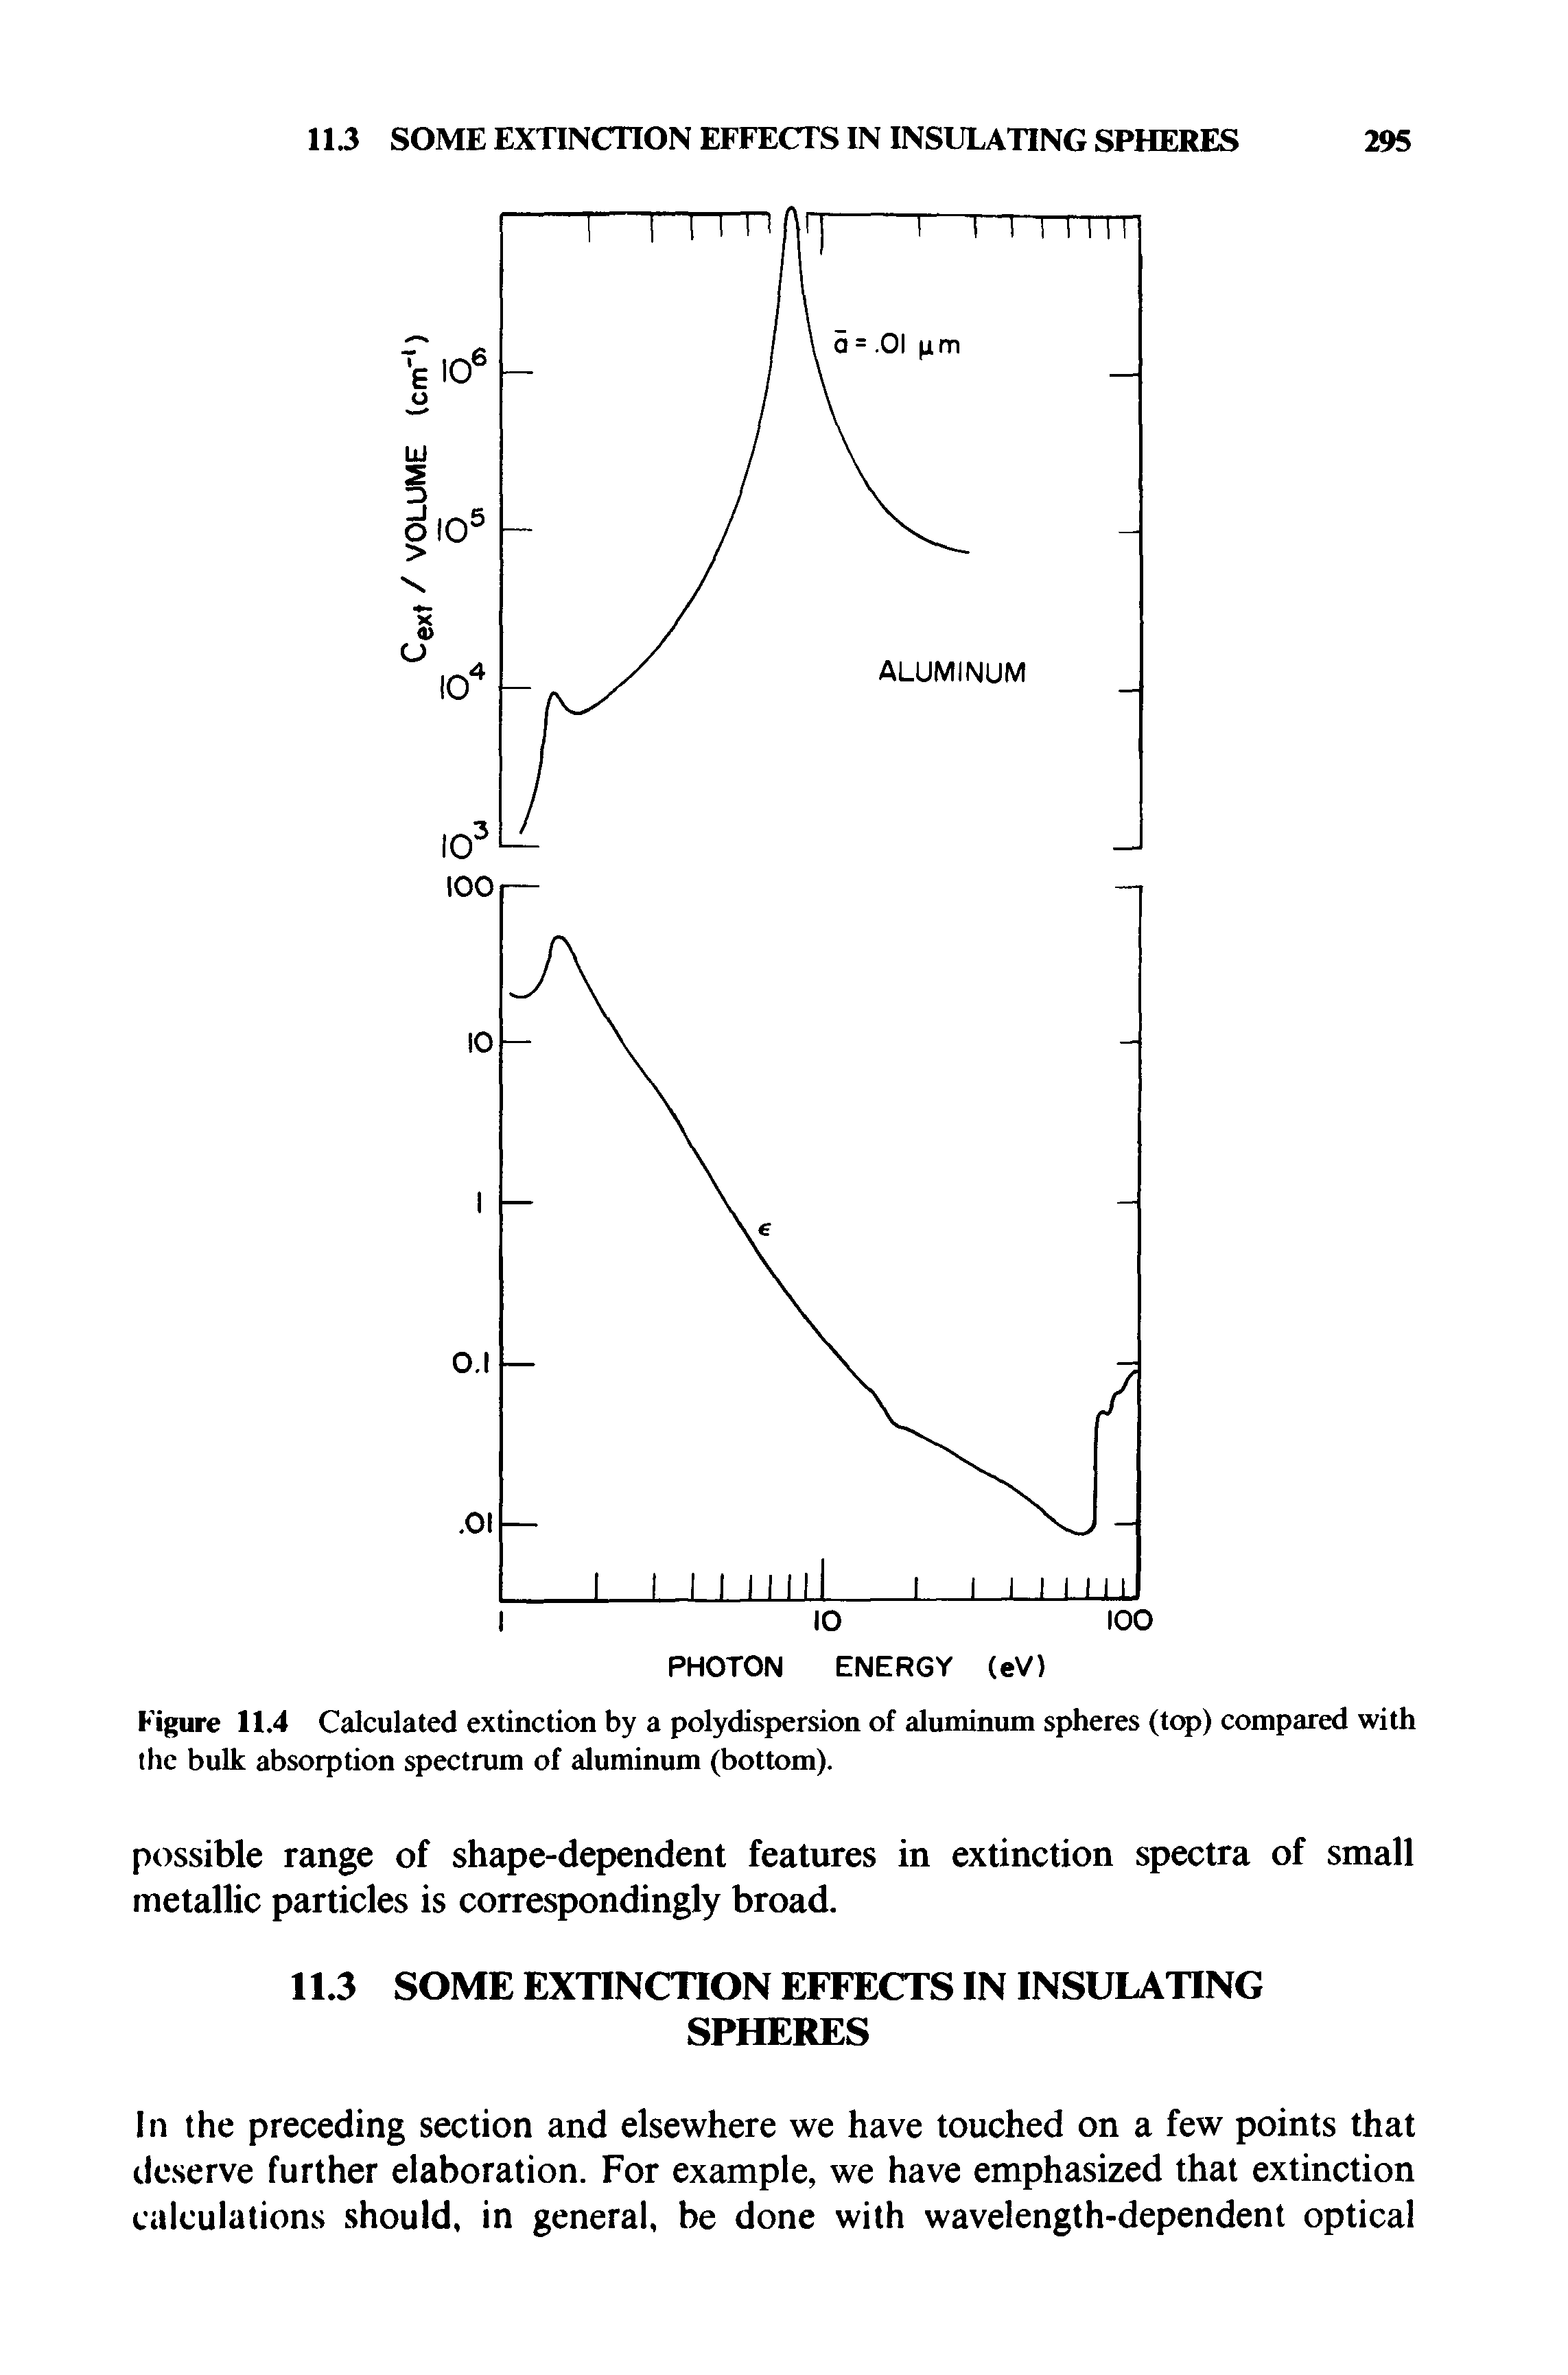 Figure 11.4 Calculated extinction by a polydispersion of aluminum spheres (top) compared with the bulk absorption spectrum of aluminum (bottom).